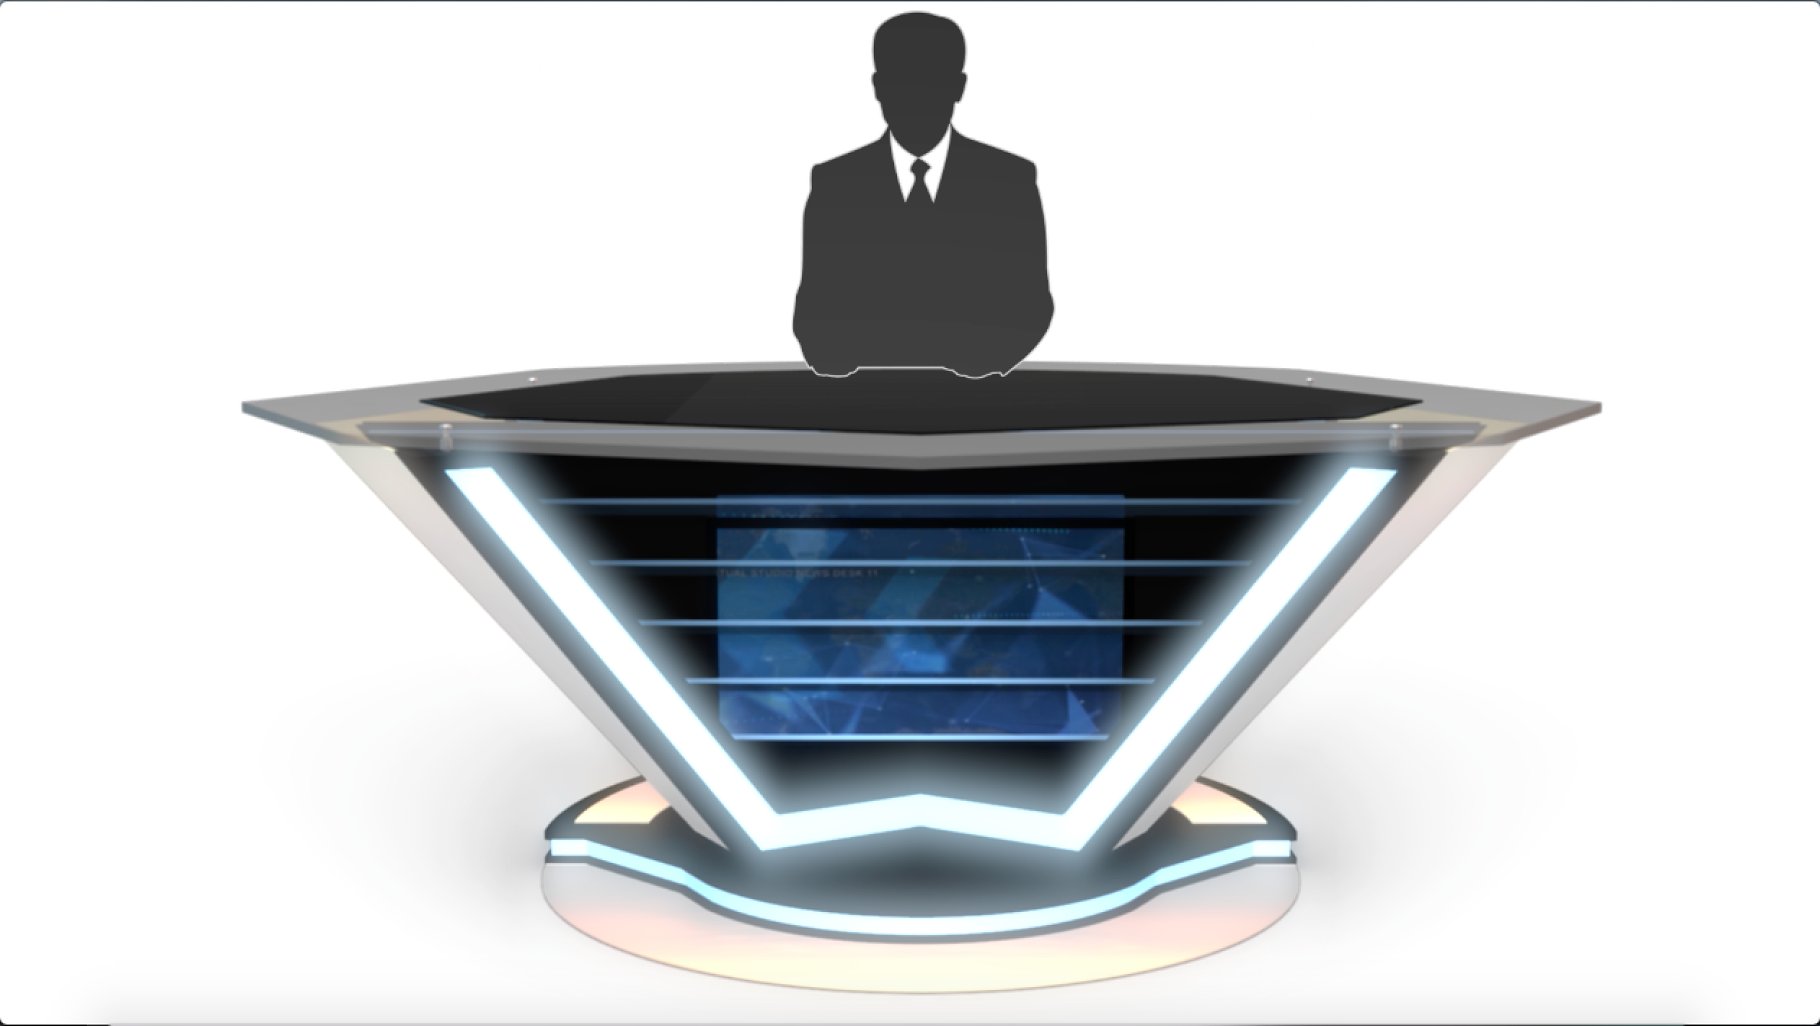 A polygonal table with a presenter.